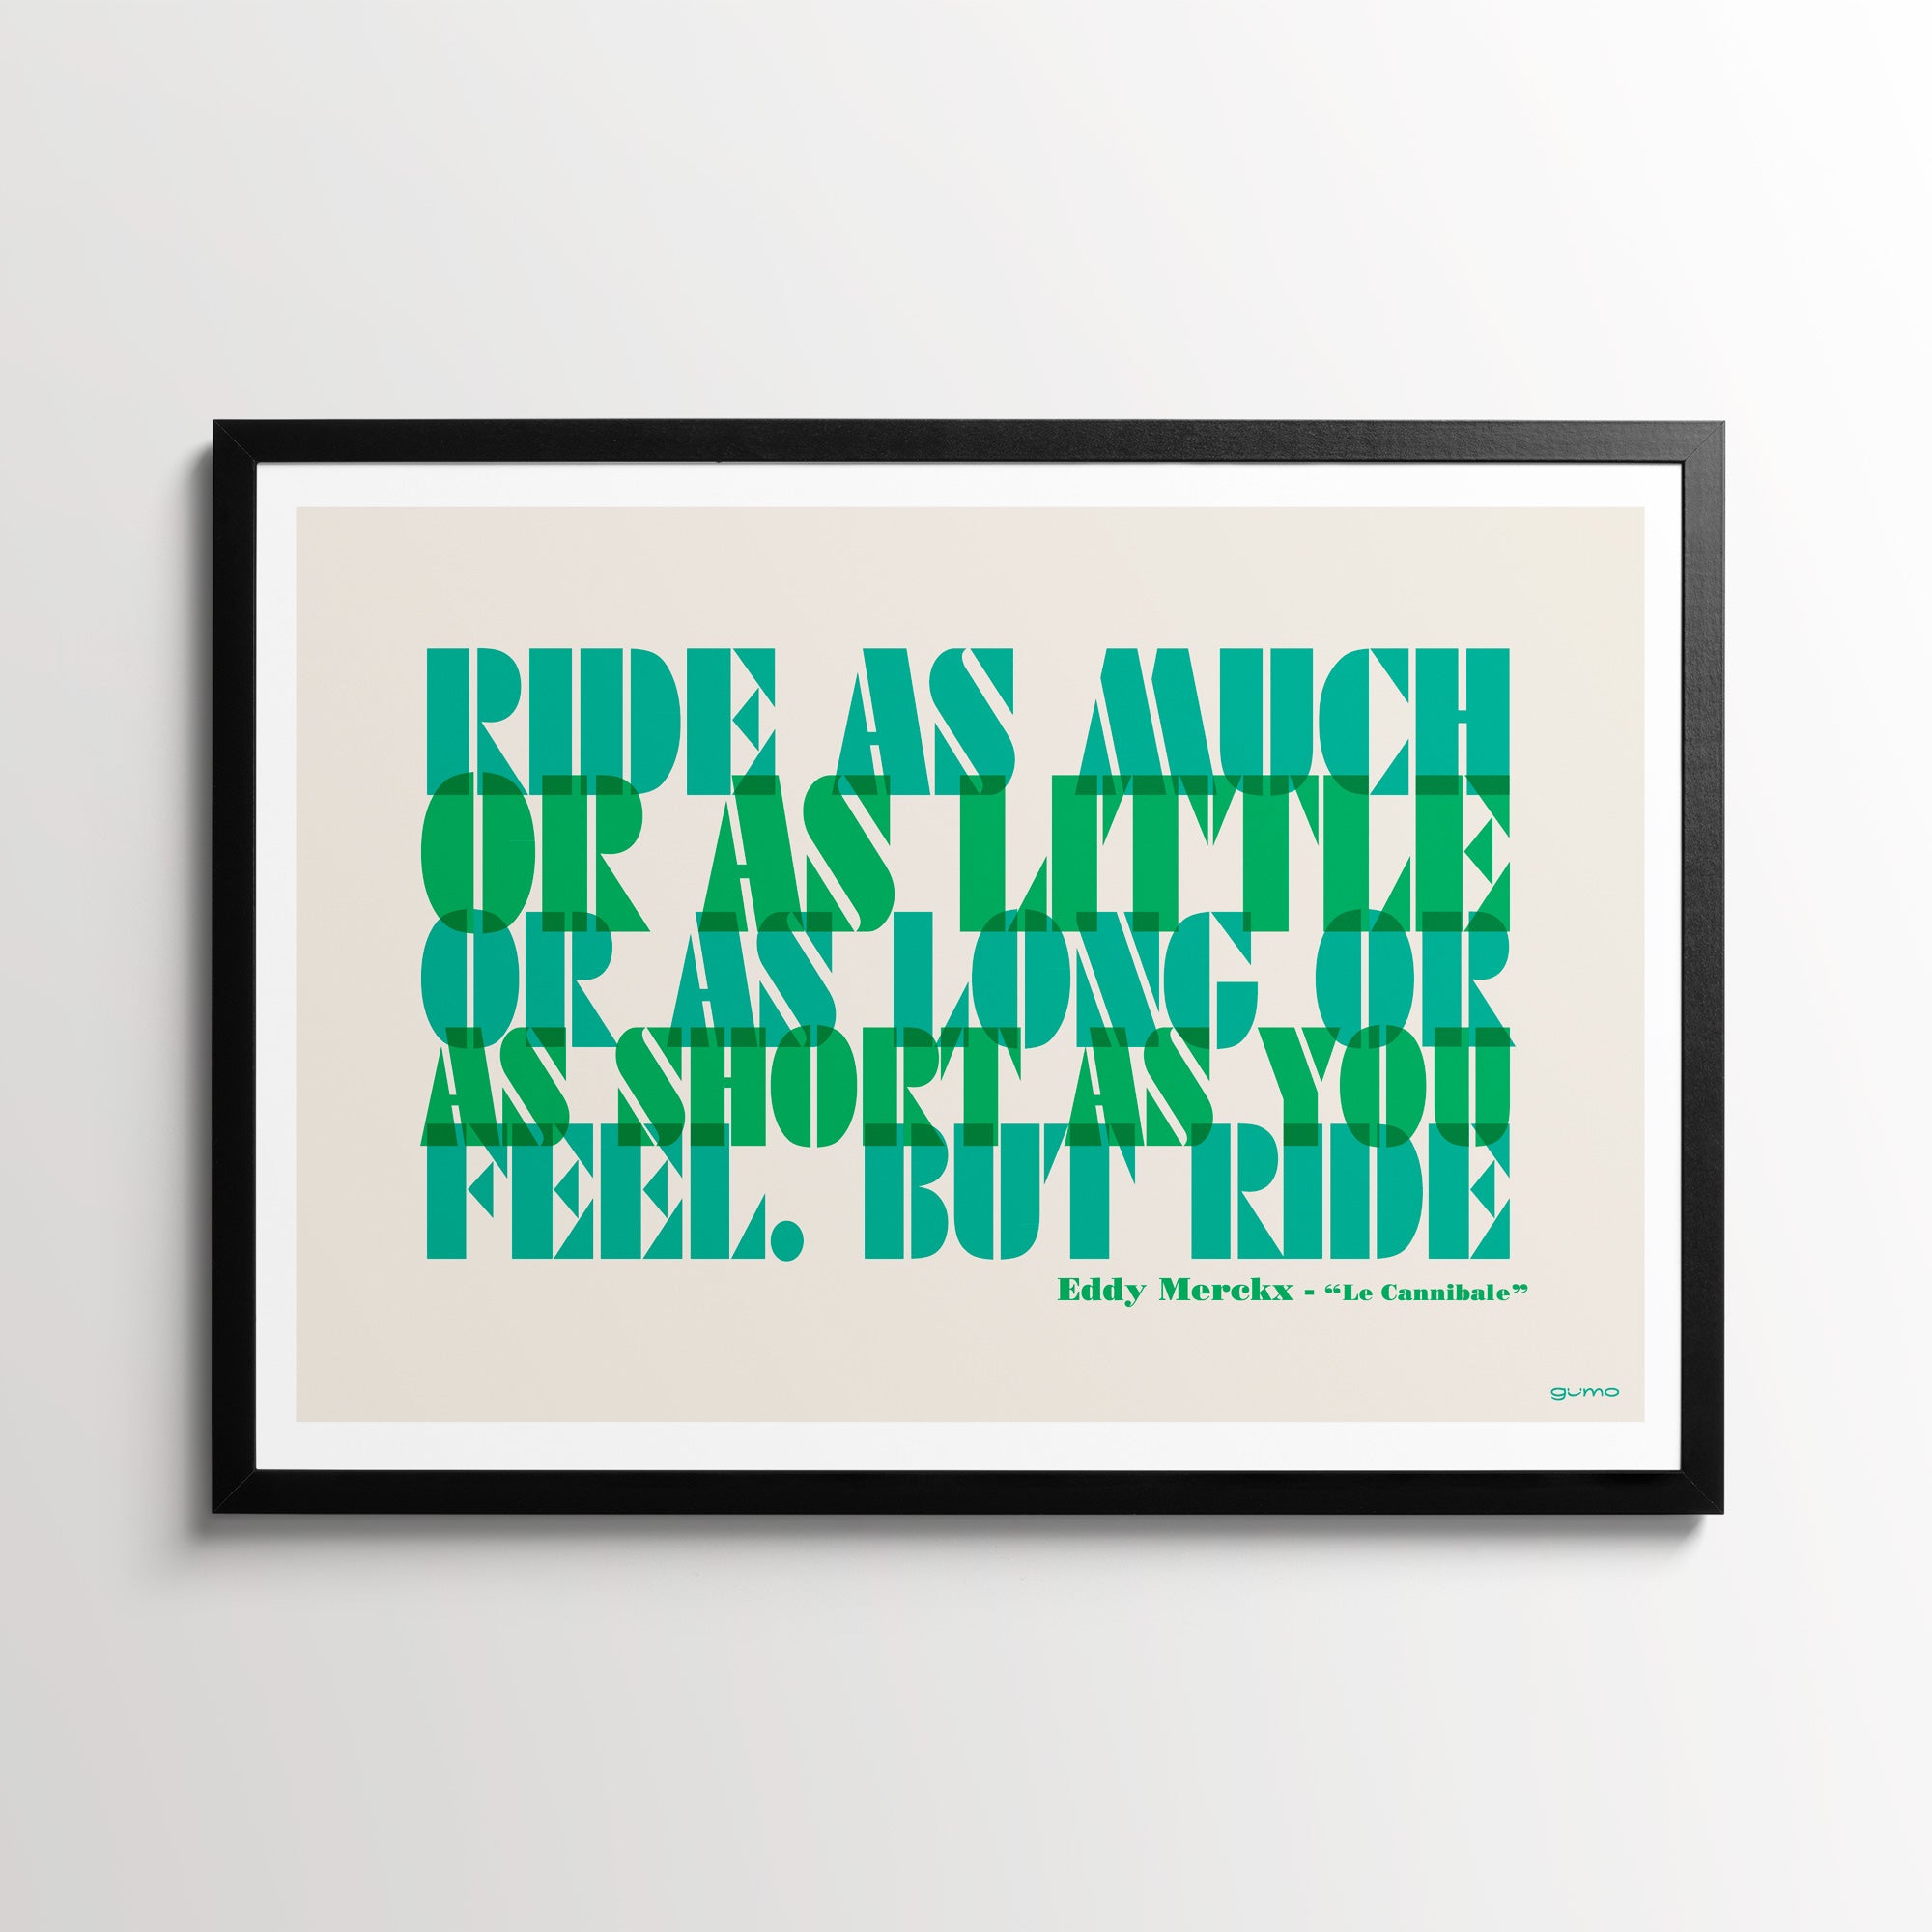 Eddy Merckx Cycling Quotes Print, "Ride as much or as little or as long or as short as you feel. But ride", with a  black frame